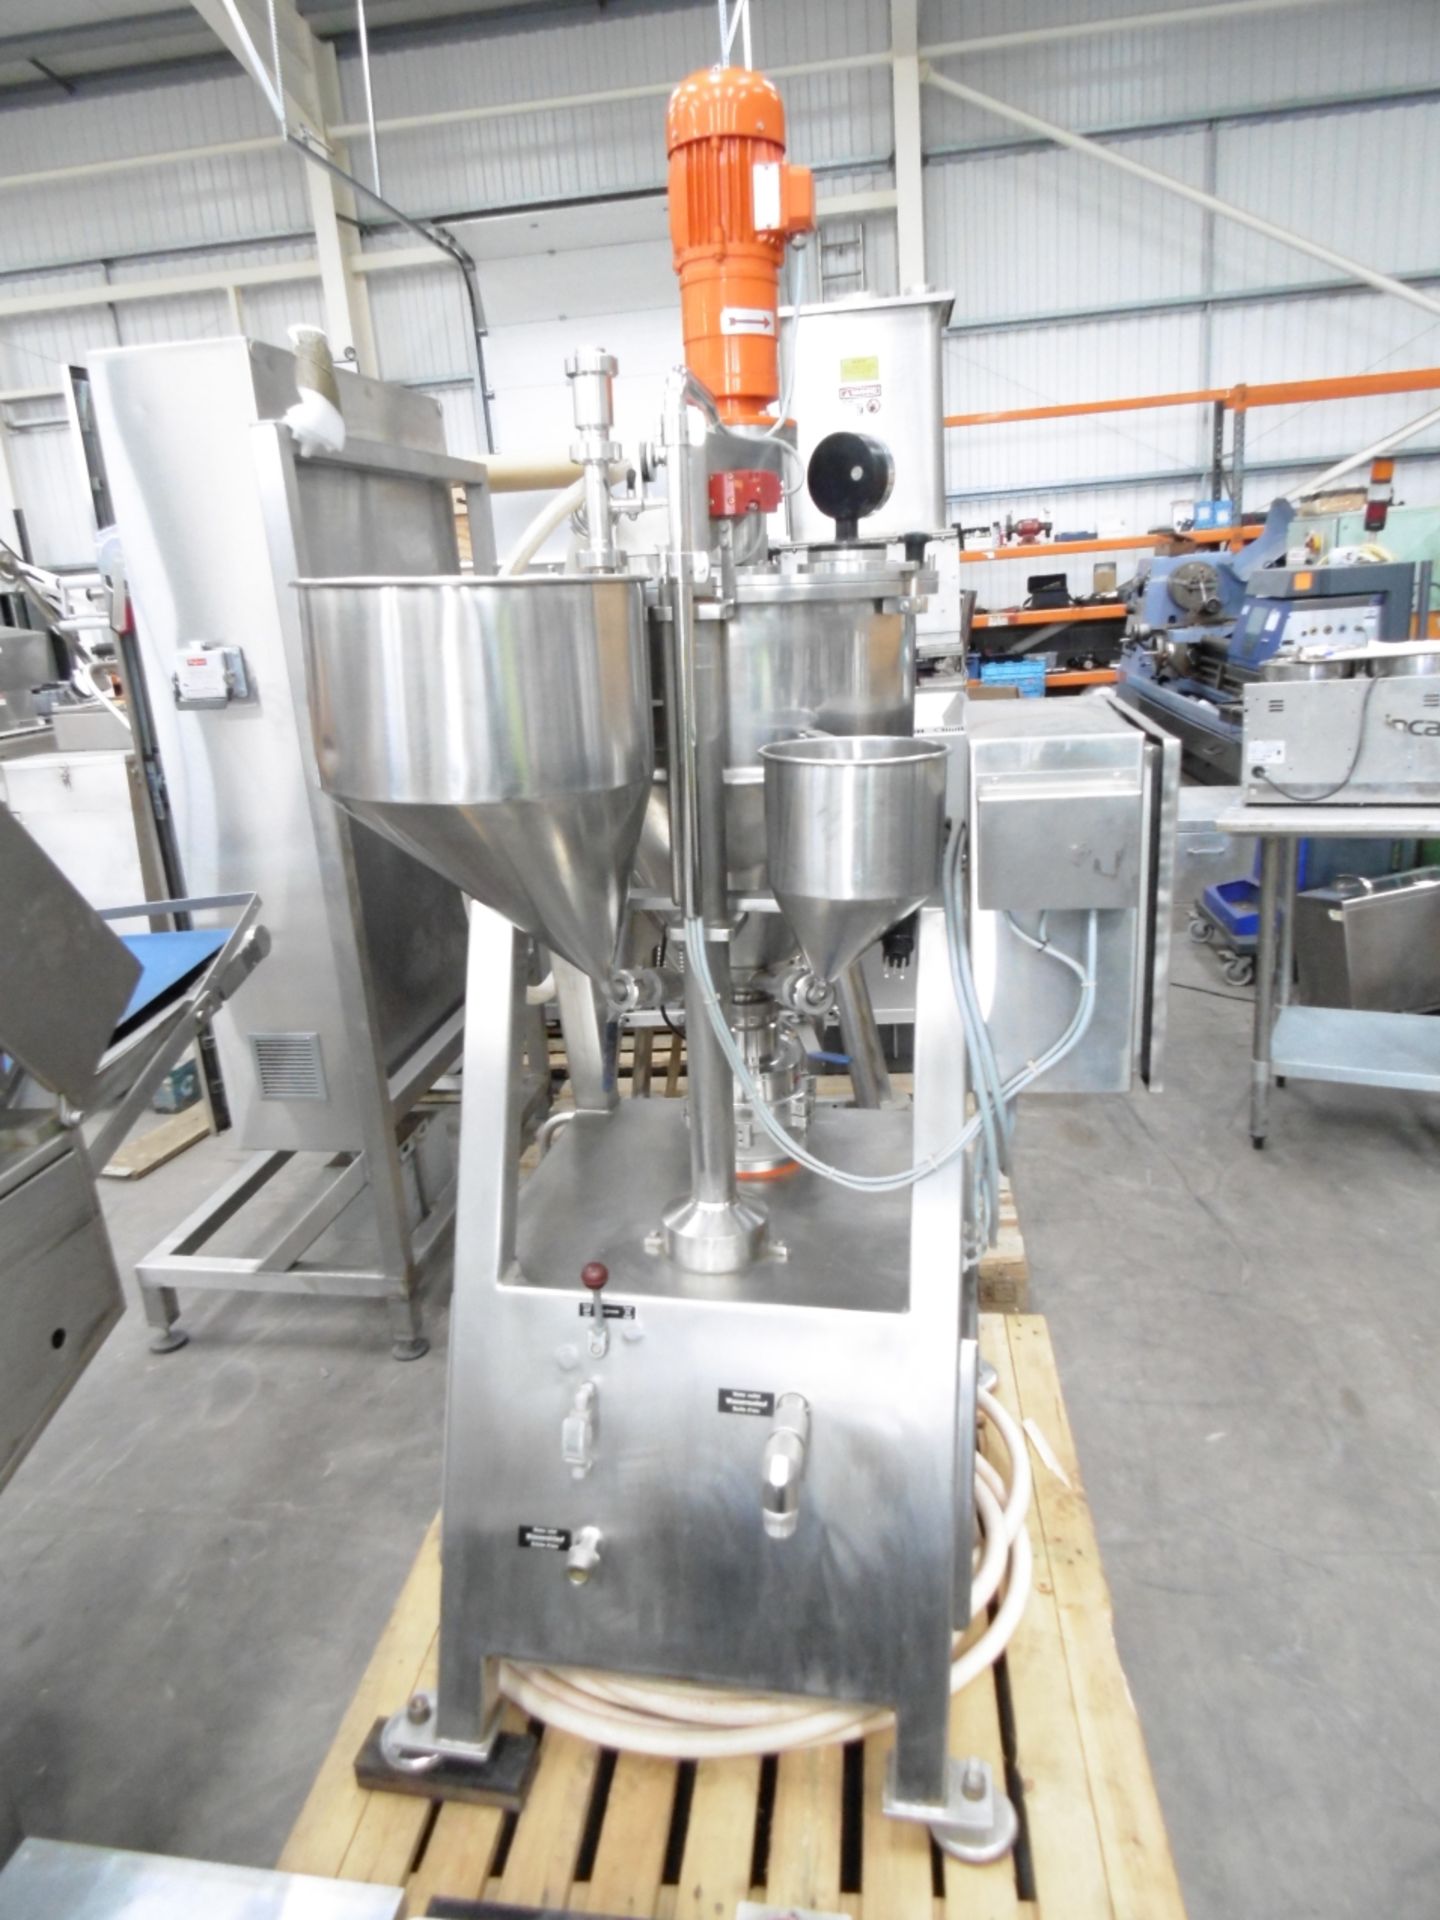 * A stainless steel Fryma jacketed vacuum press process vessel. Please note there is a £5 + VAT Lift